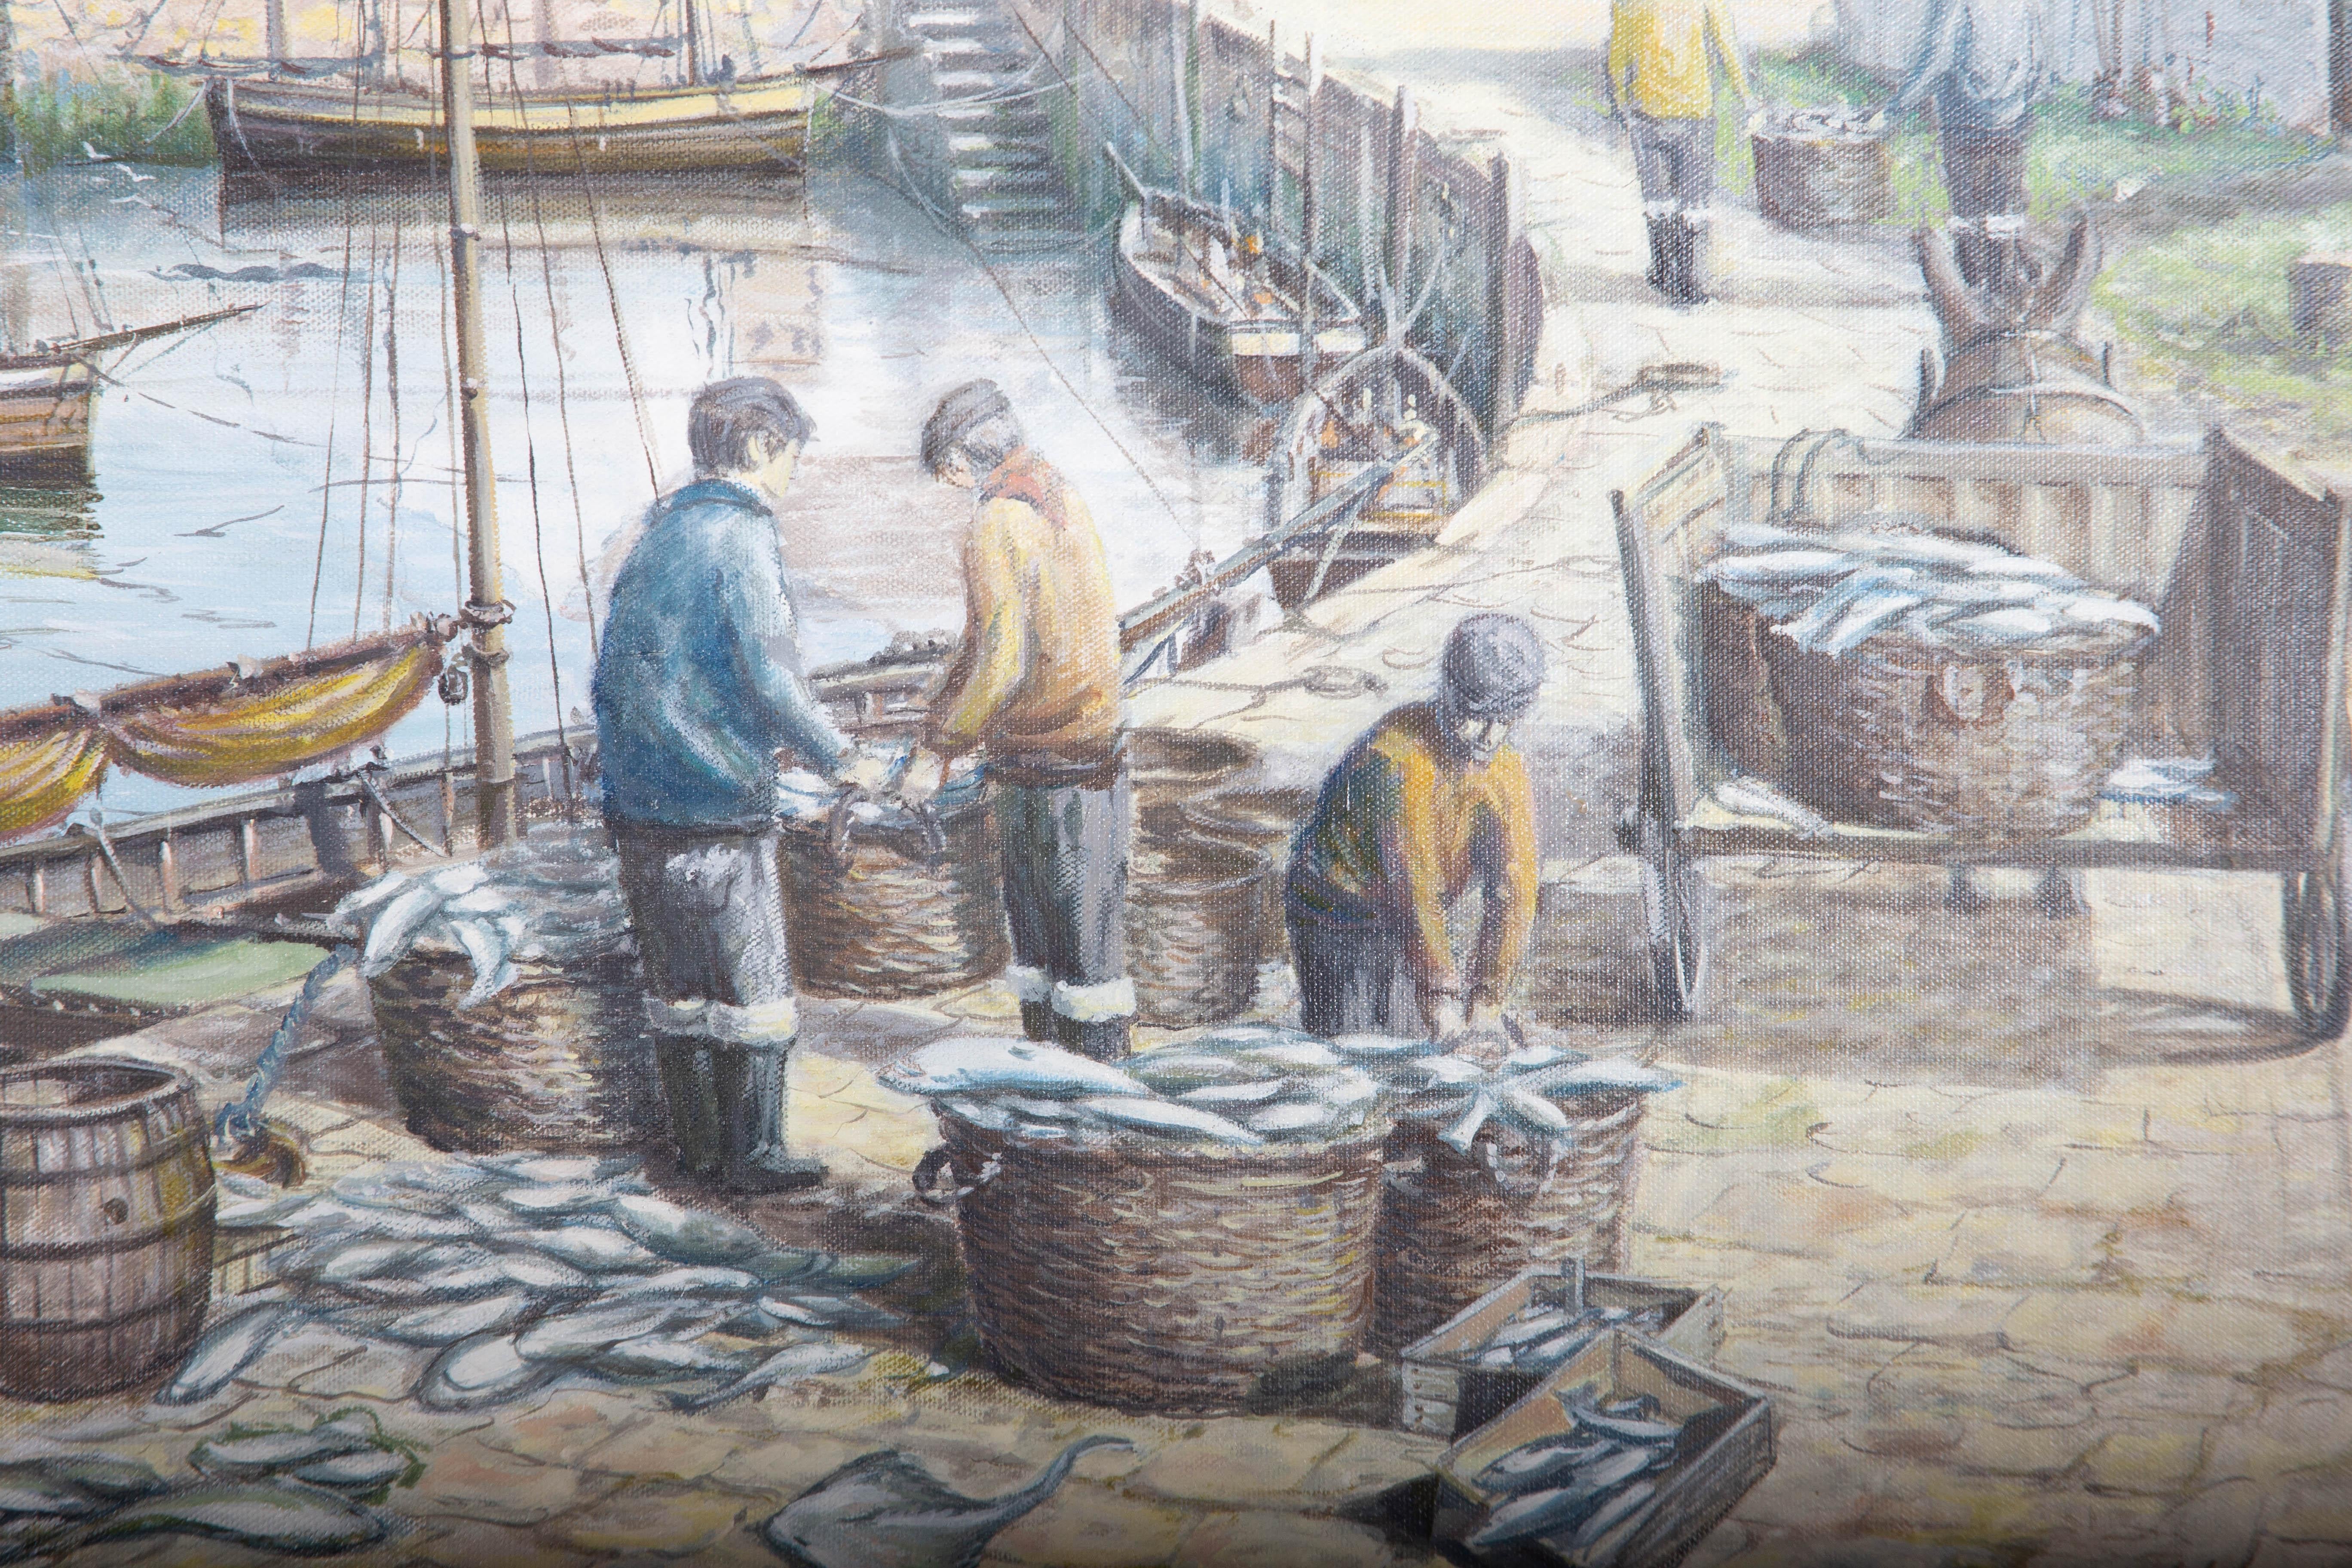 A wonderfully detailed harbour scene, likely depicting a Cornish fishing village. Fishermen sort through their catch in the foreground while seagulls soar overhead. Presented in an ornate gilt-effect wooden frame. Signed to the lower-right edge. On